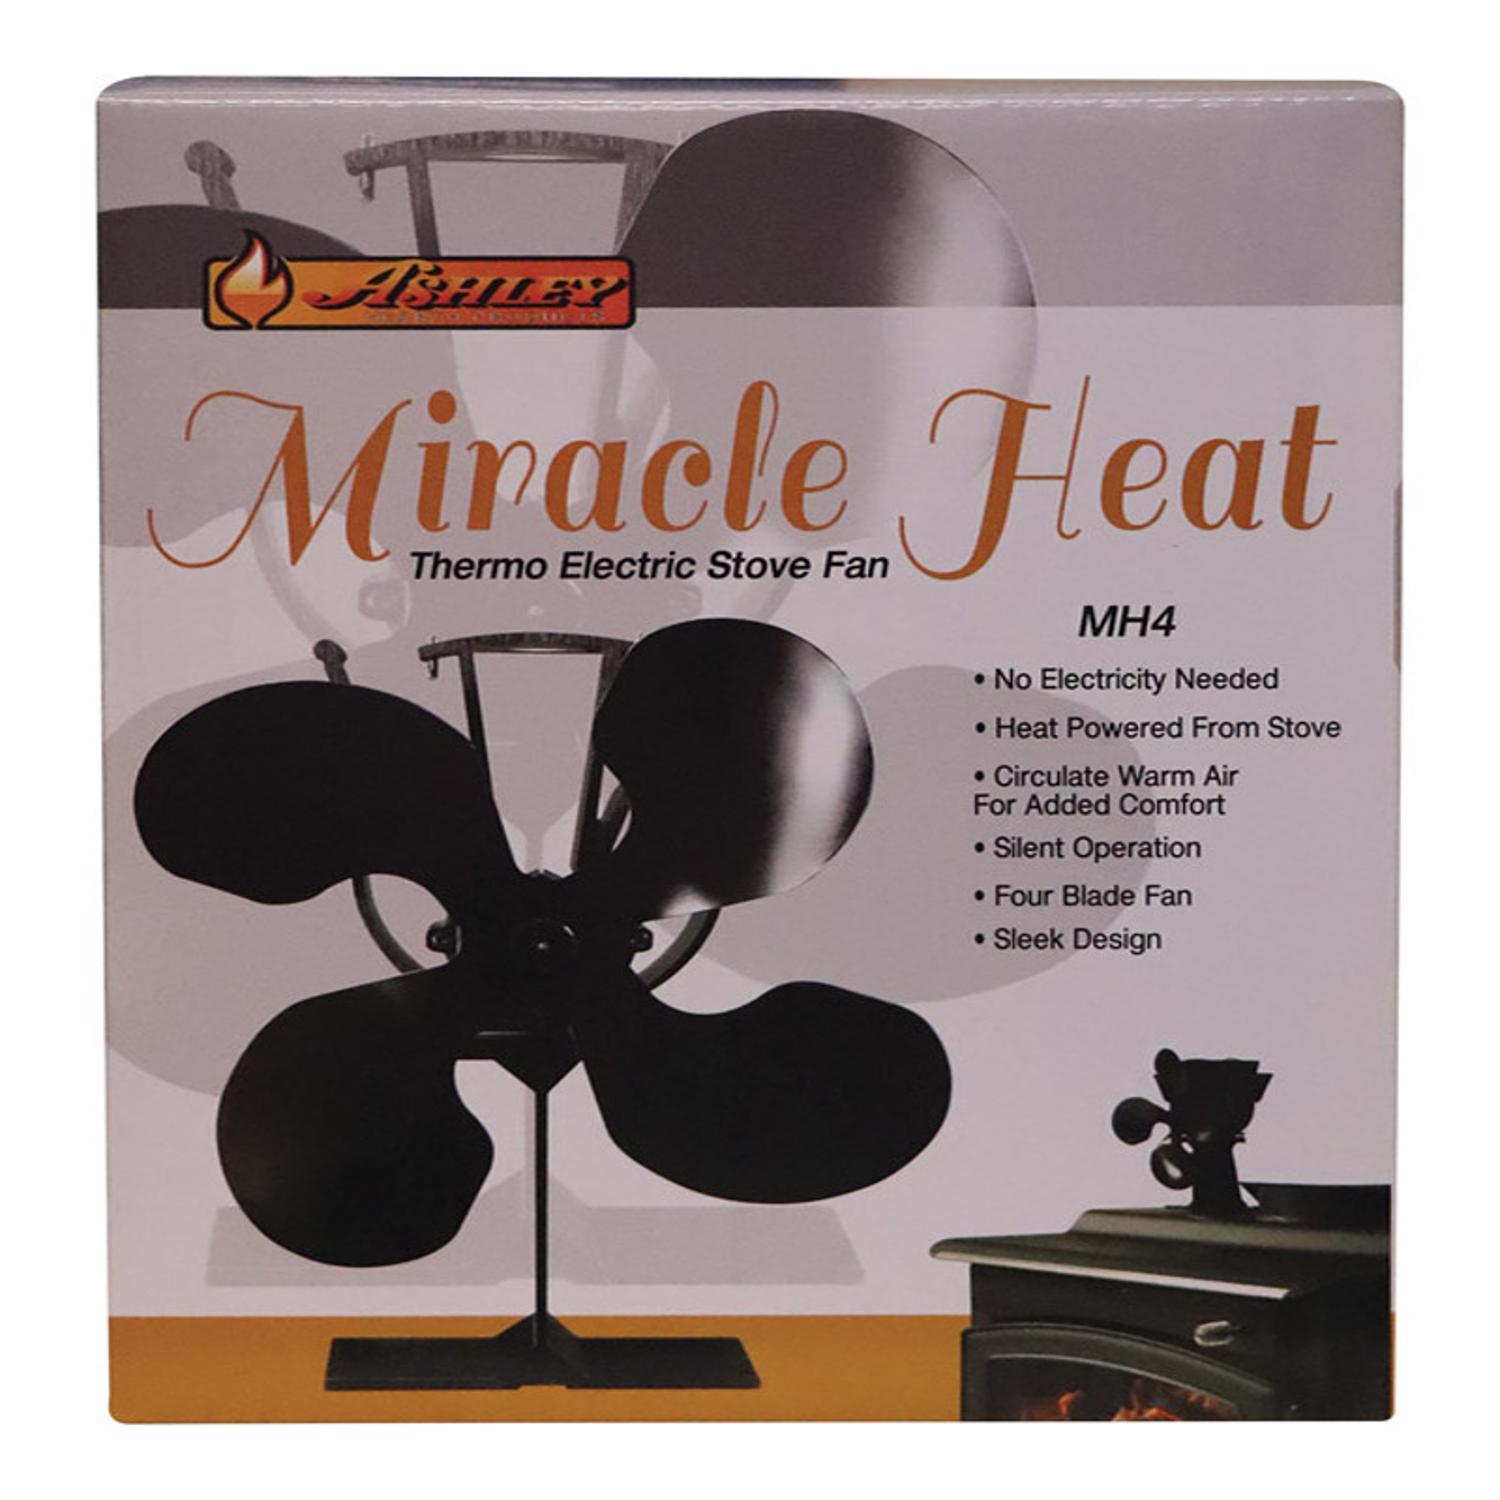 Photos - Other for heating US Stove Ashley Miracle Heat Steel Elegant Wood Stove Fan MH4